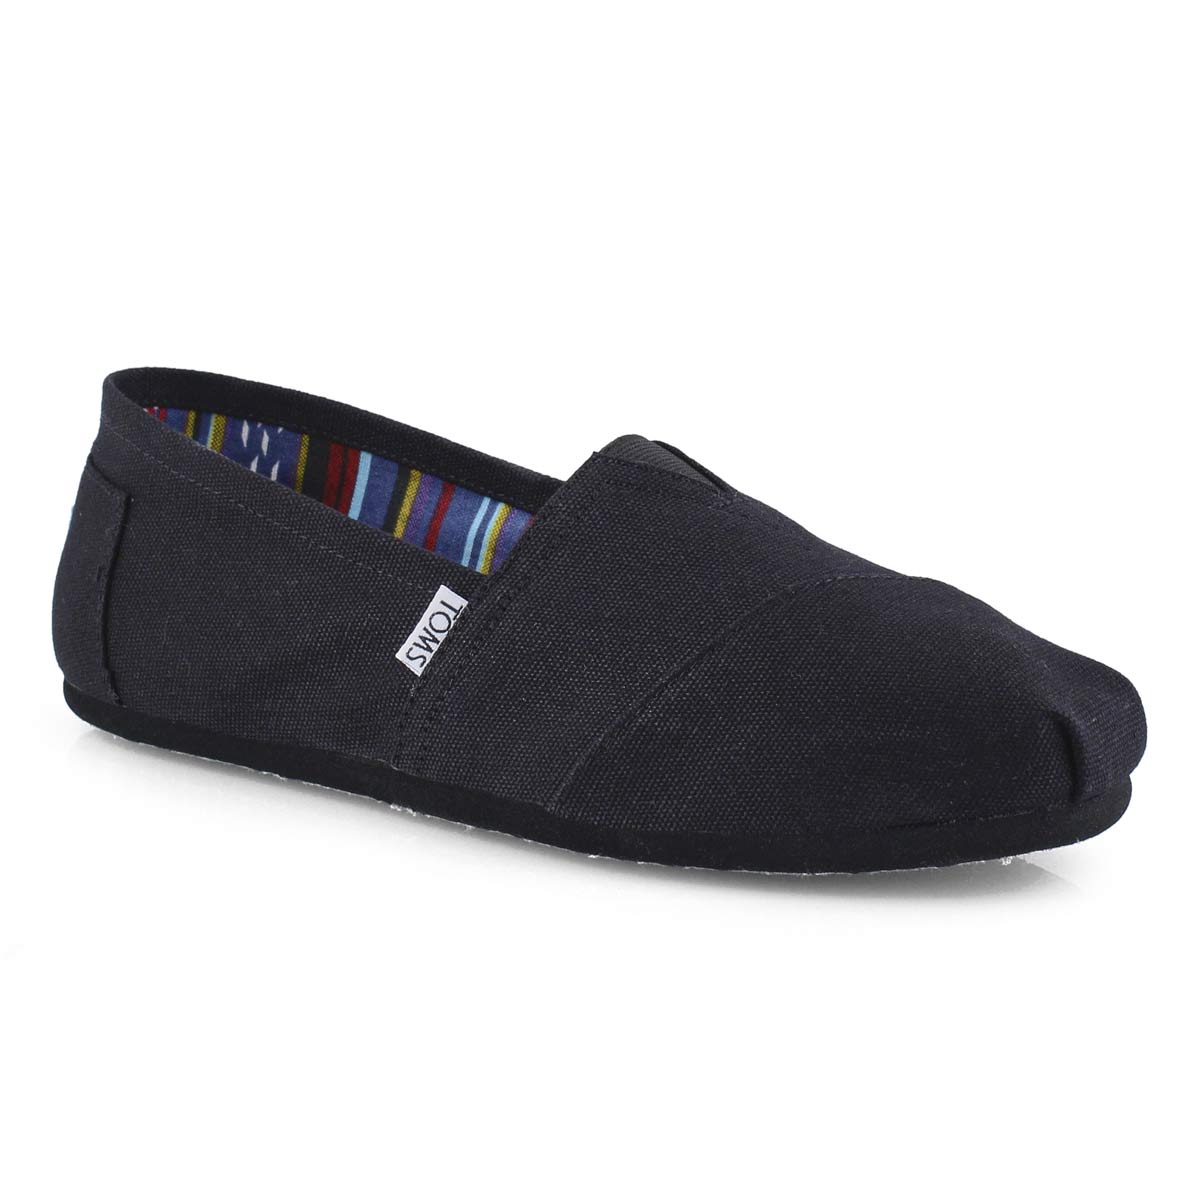 TOMS Men's CLASSIC black casual loafers 